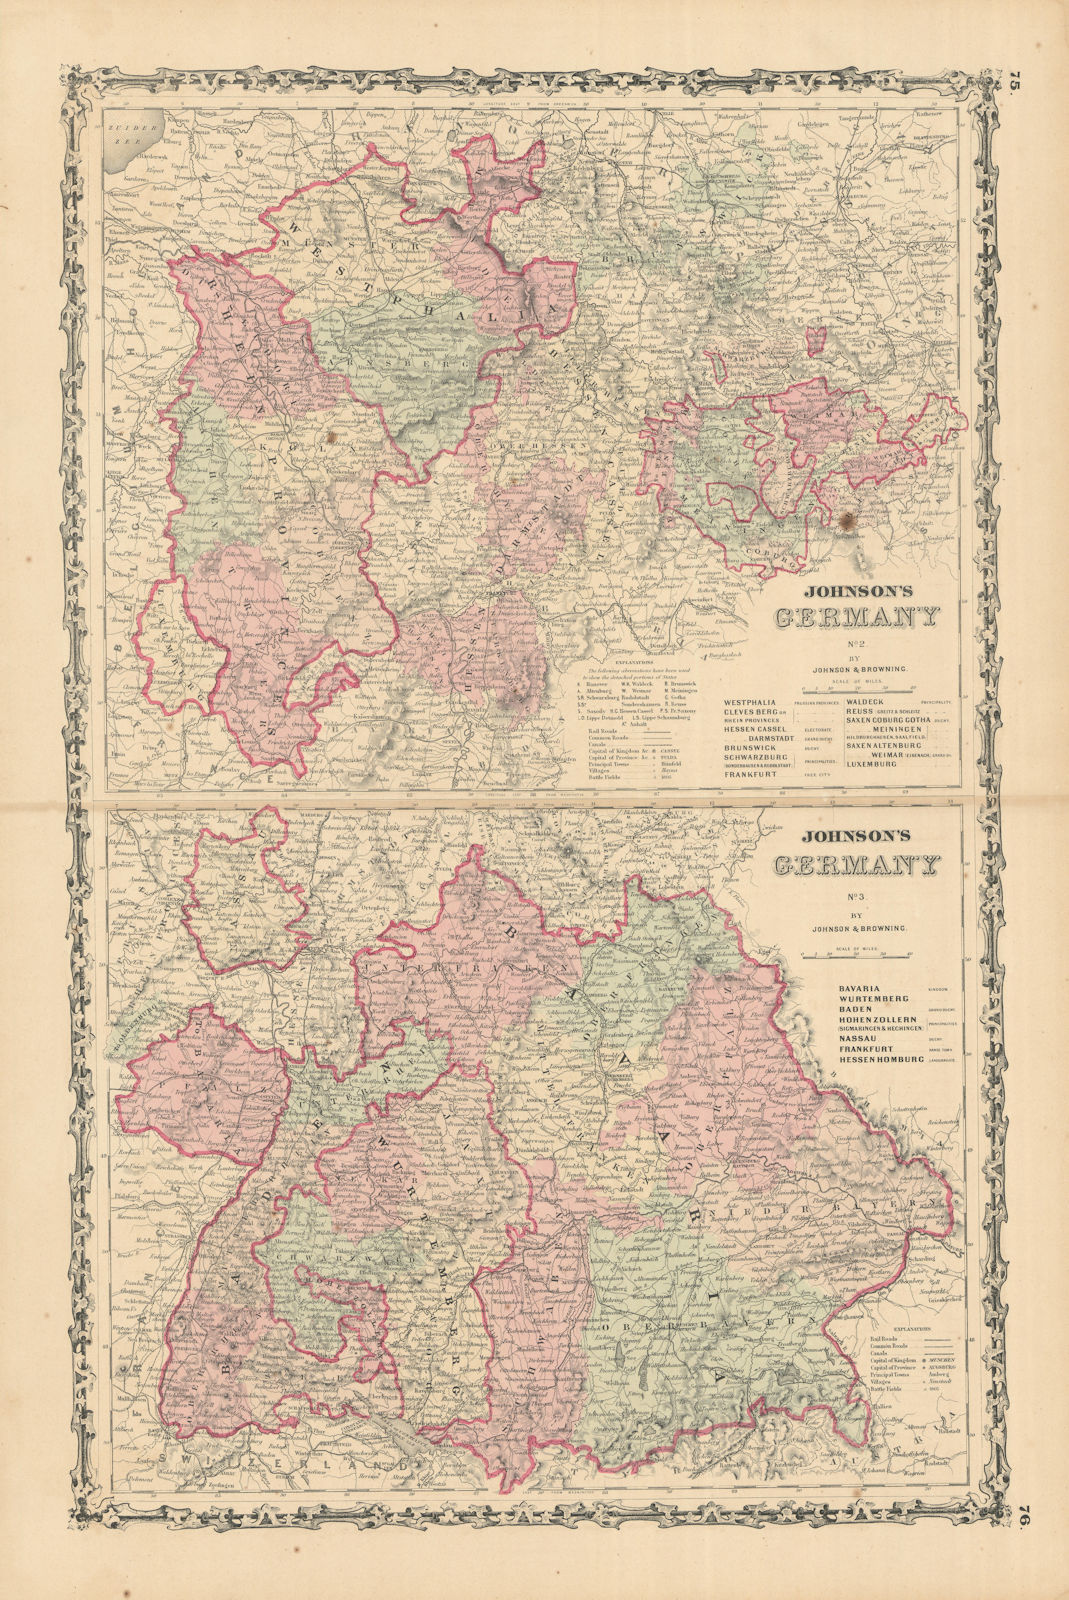 Associate Product Johnson's Germany No. 2 & No. 3. South & Western Germany 1861 old antique map